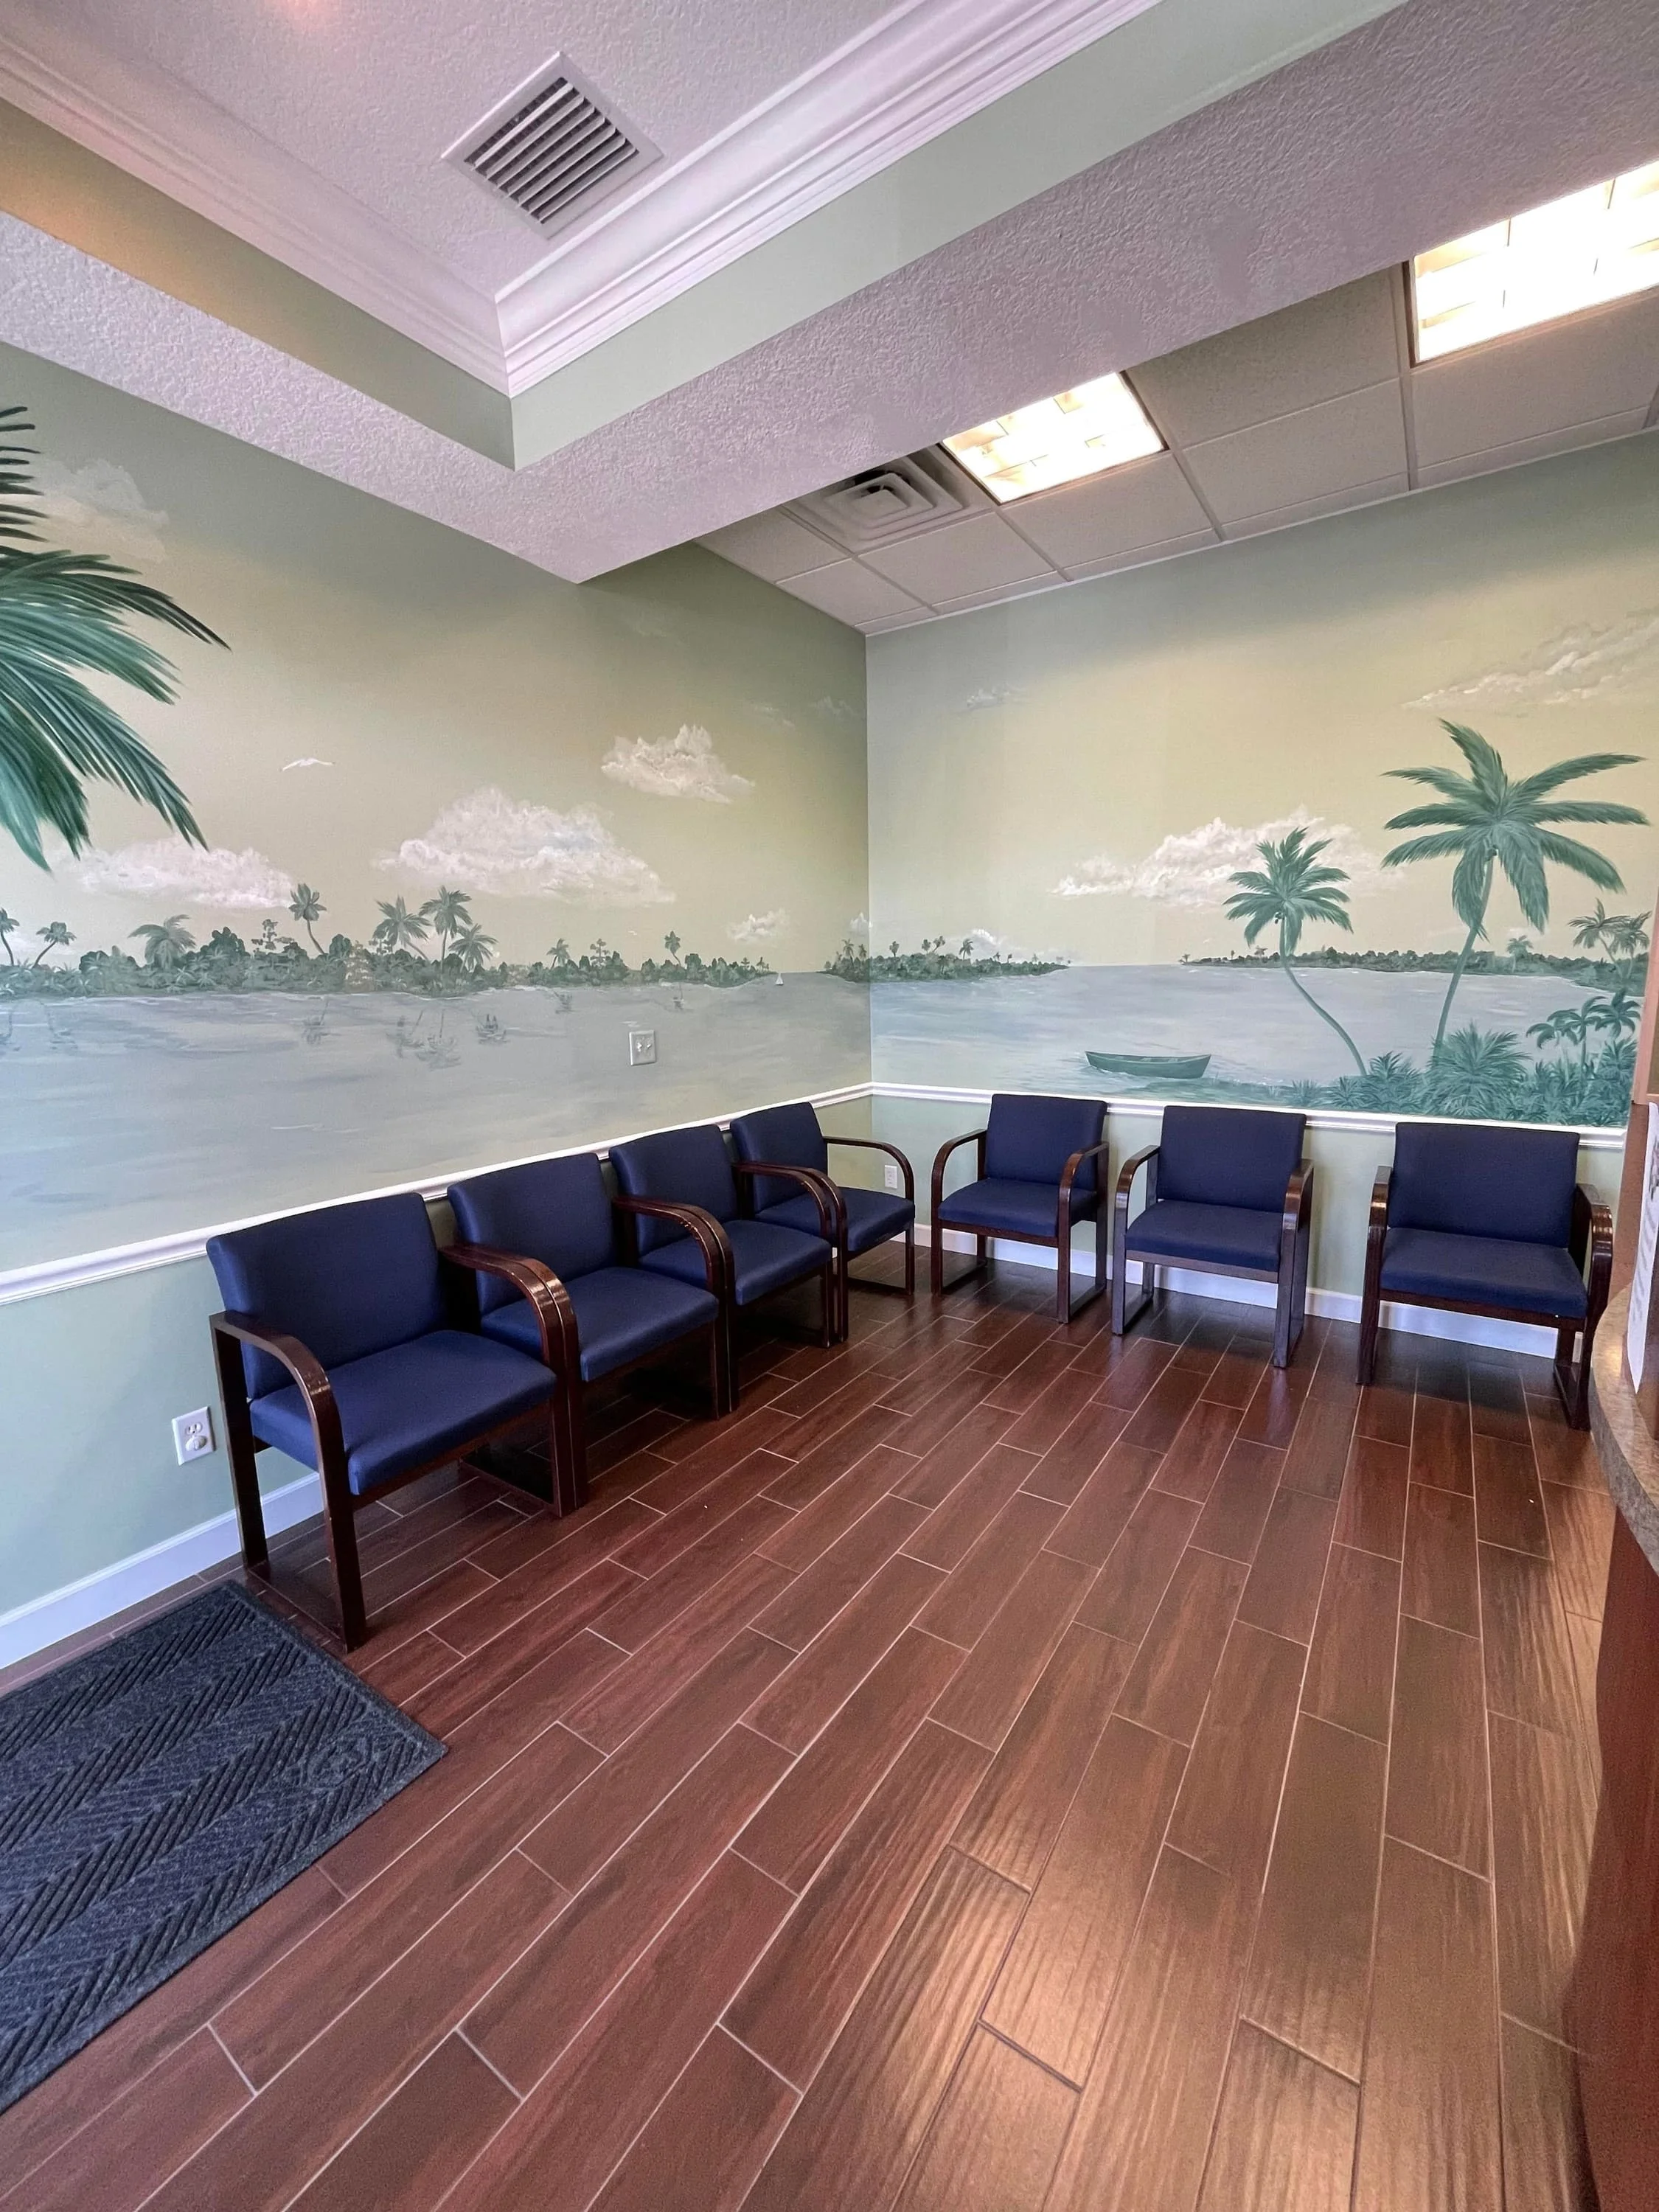 Achieving Wellness Chiropractic - Chiropractor in Port St. Lucie, FL, USA  :: Virtual Office Tour